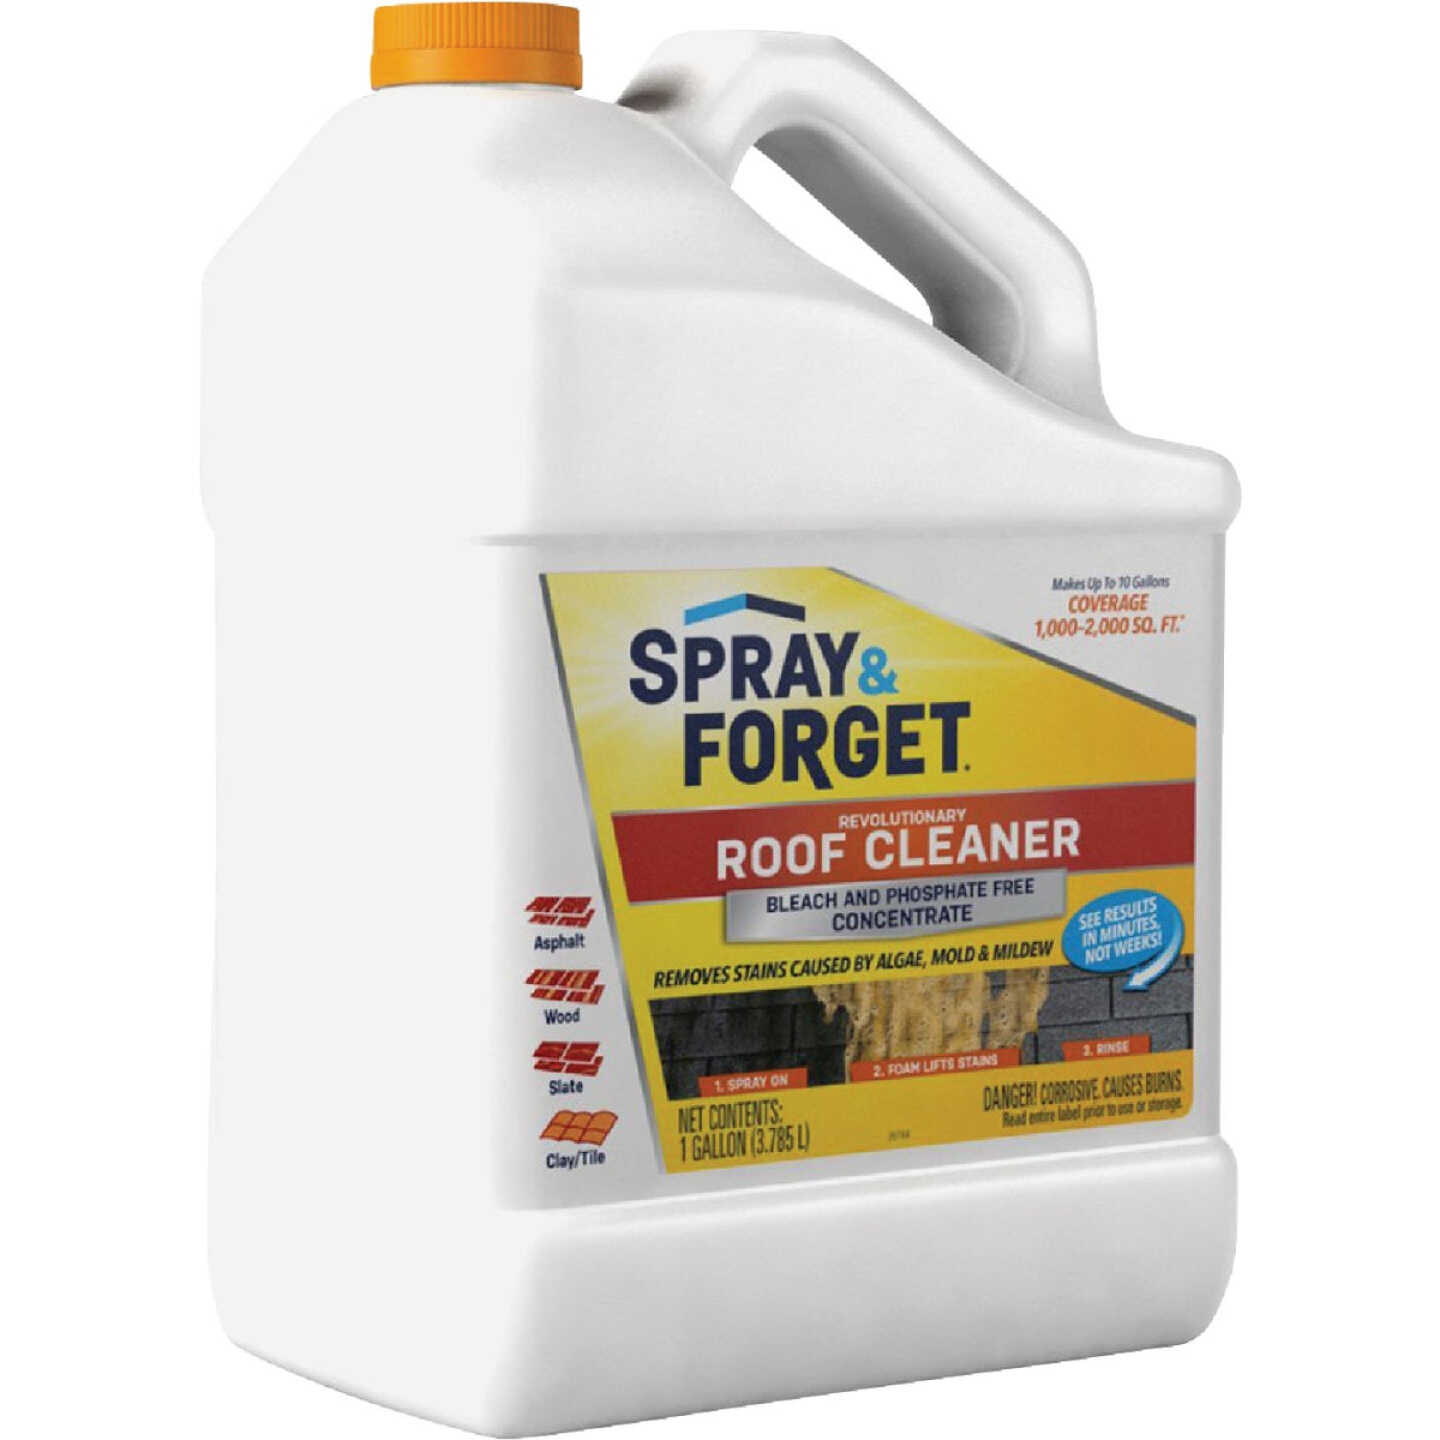 Wet & Forget Moss, Mold, Mildew, & Algae Stain Remover - 0.5 gal